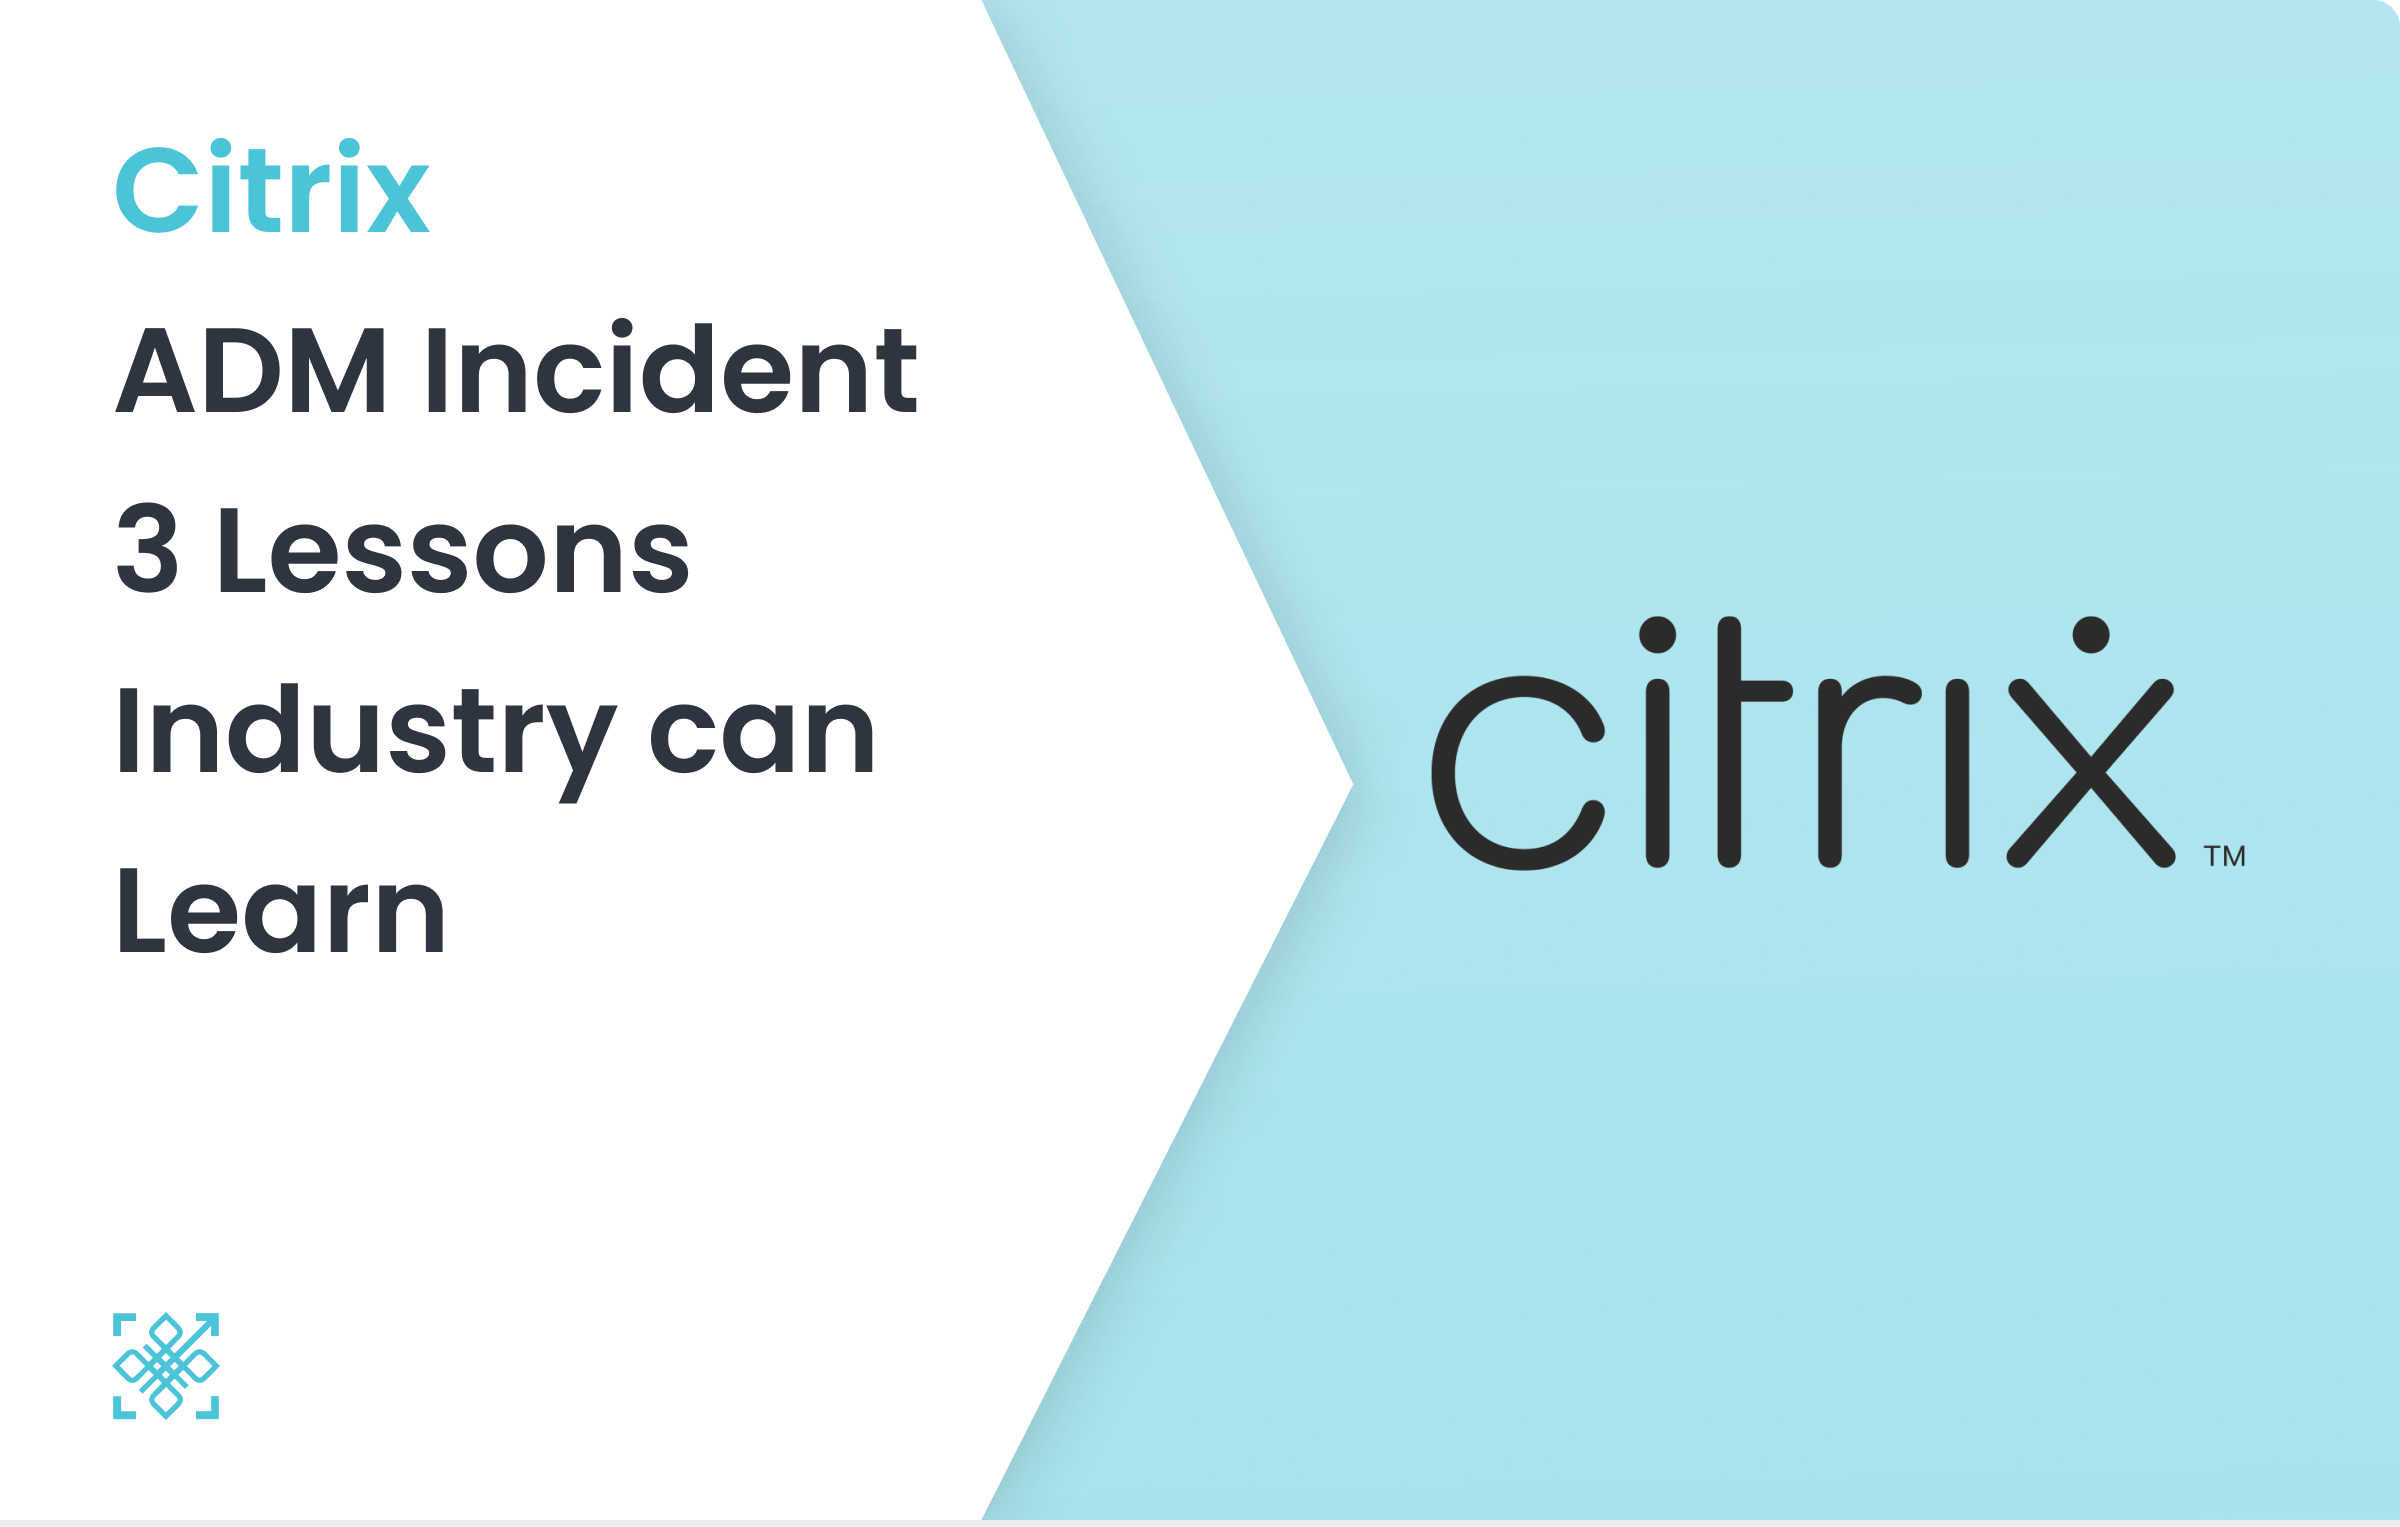 Citrix ADM Incident; 3 Lessons Industry can Learn